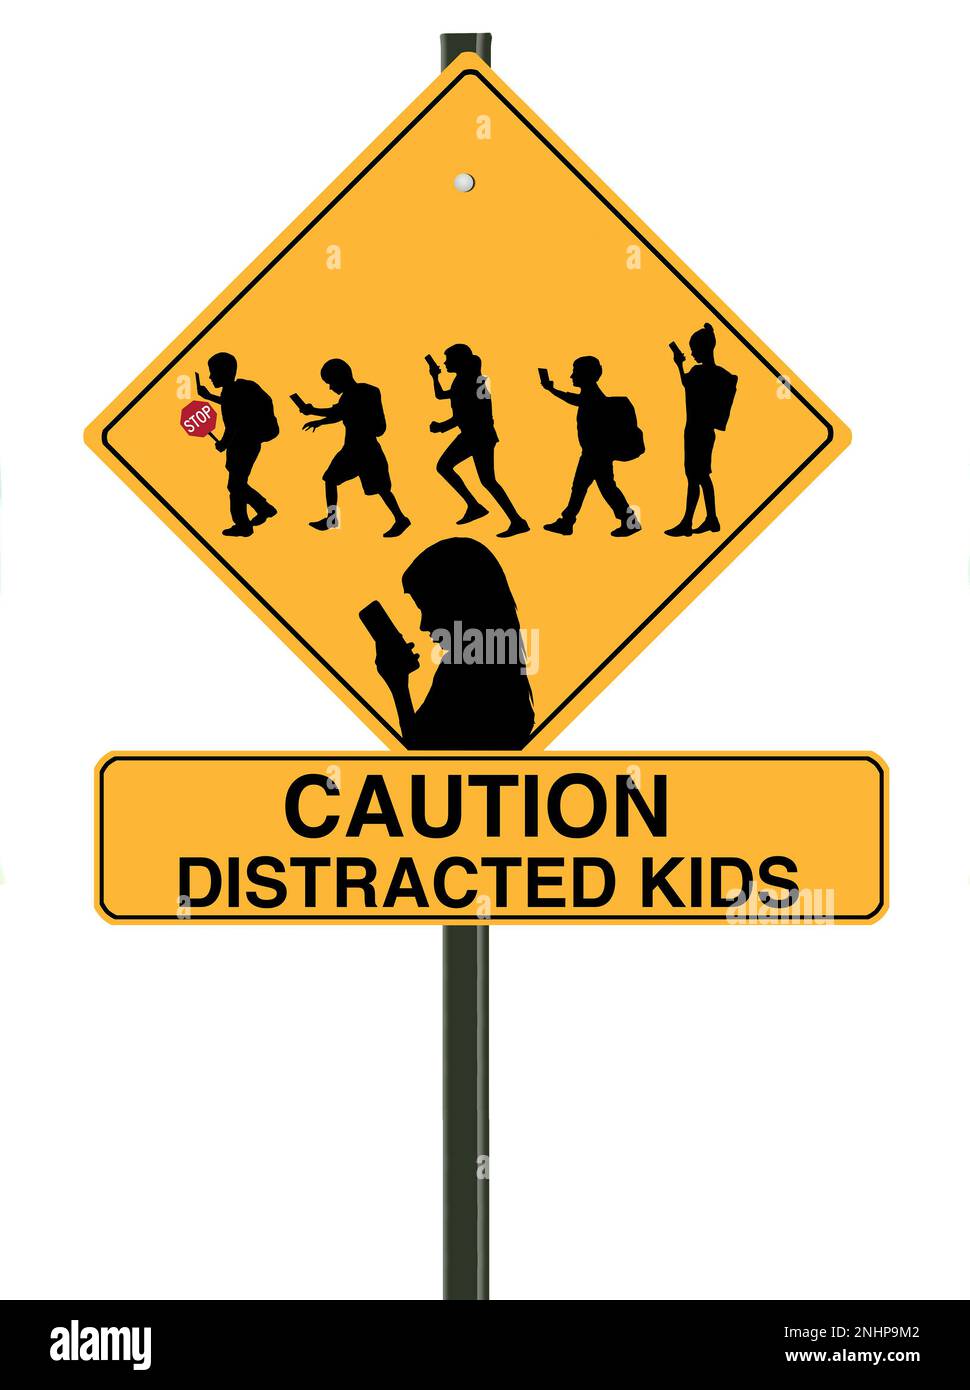 A school crossing sign includes silhouettes of children using cell phones and warns to look out for distracted kids. This is a 3-d  illustration. Stock Photo